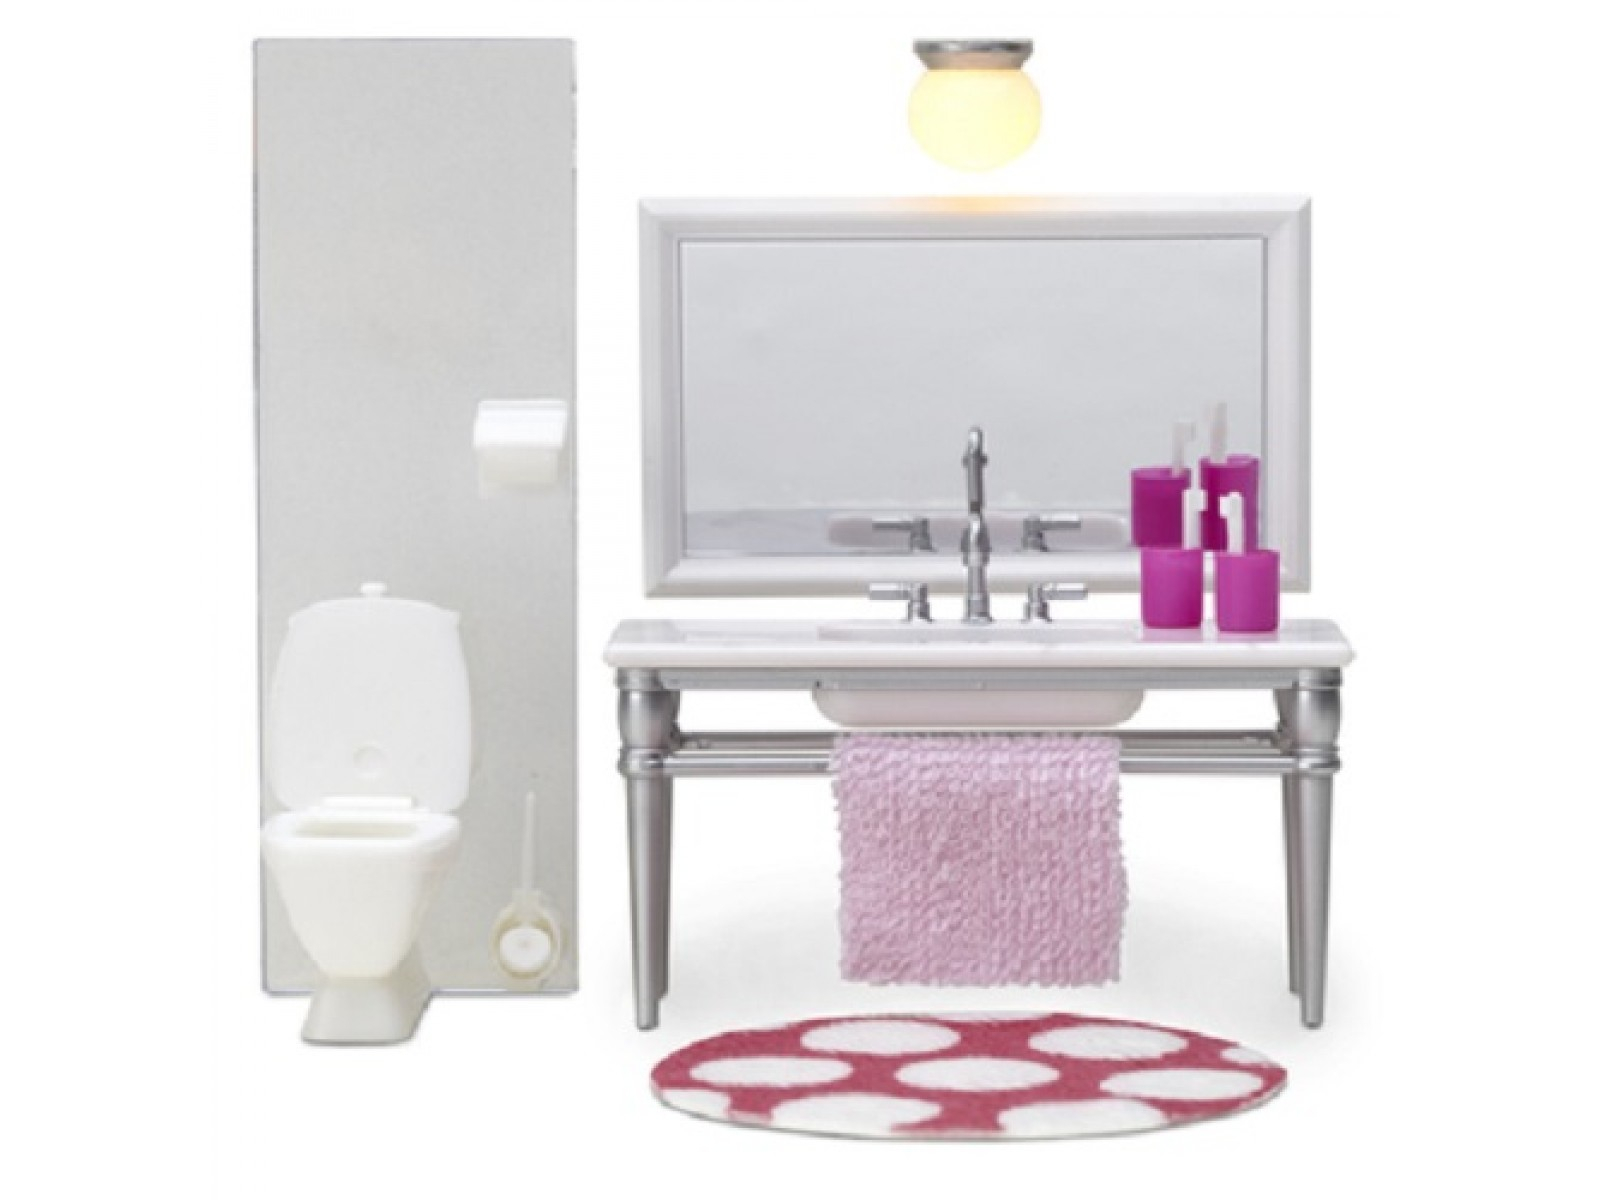 Lund Smaland 118 Bathroom Furniture Sink Unit And Toilet Set within dimensions 1600 X 1200